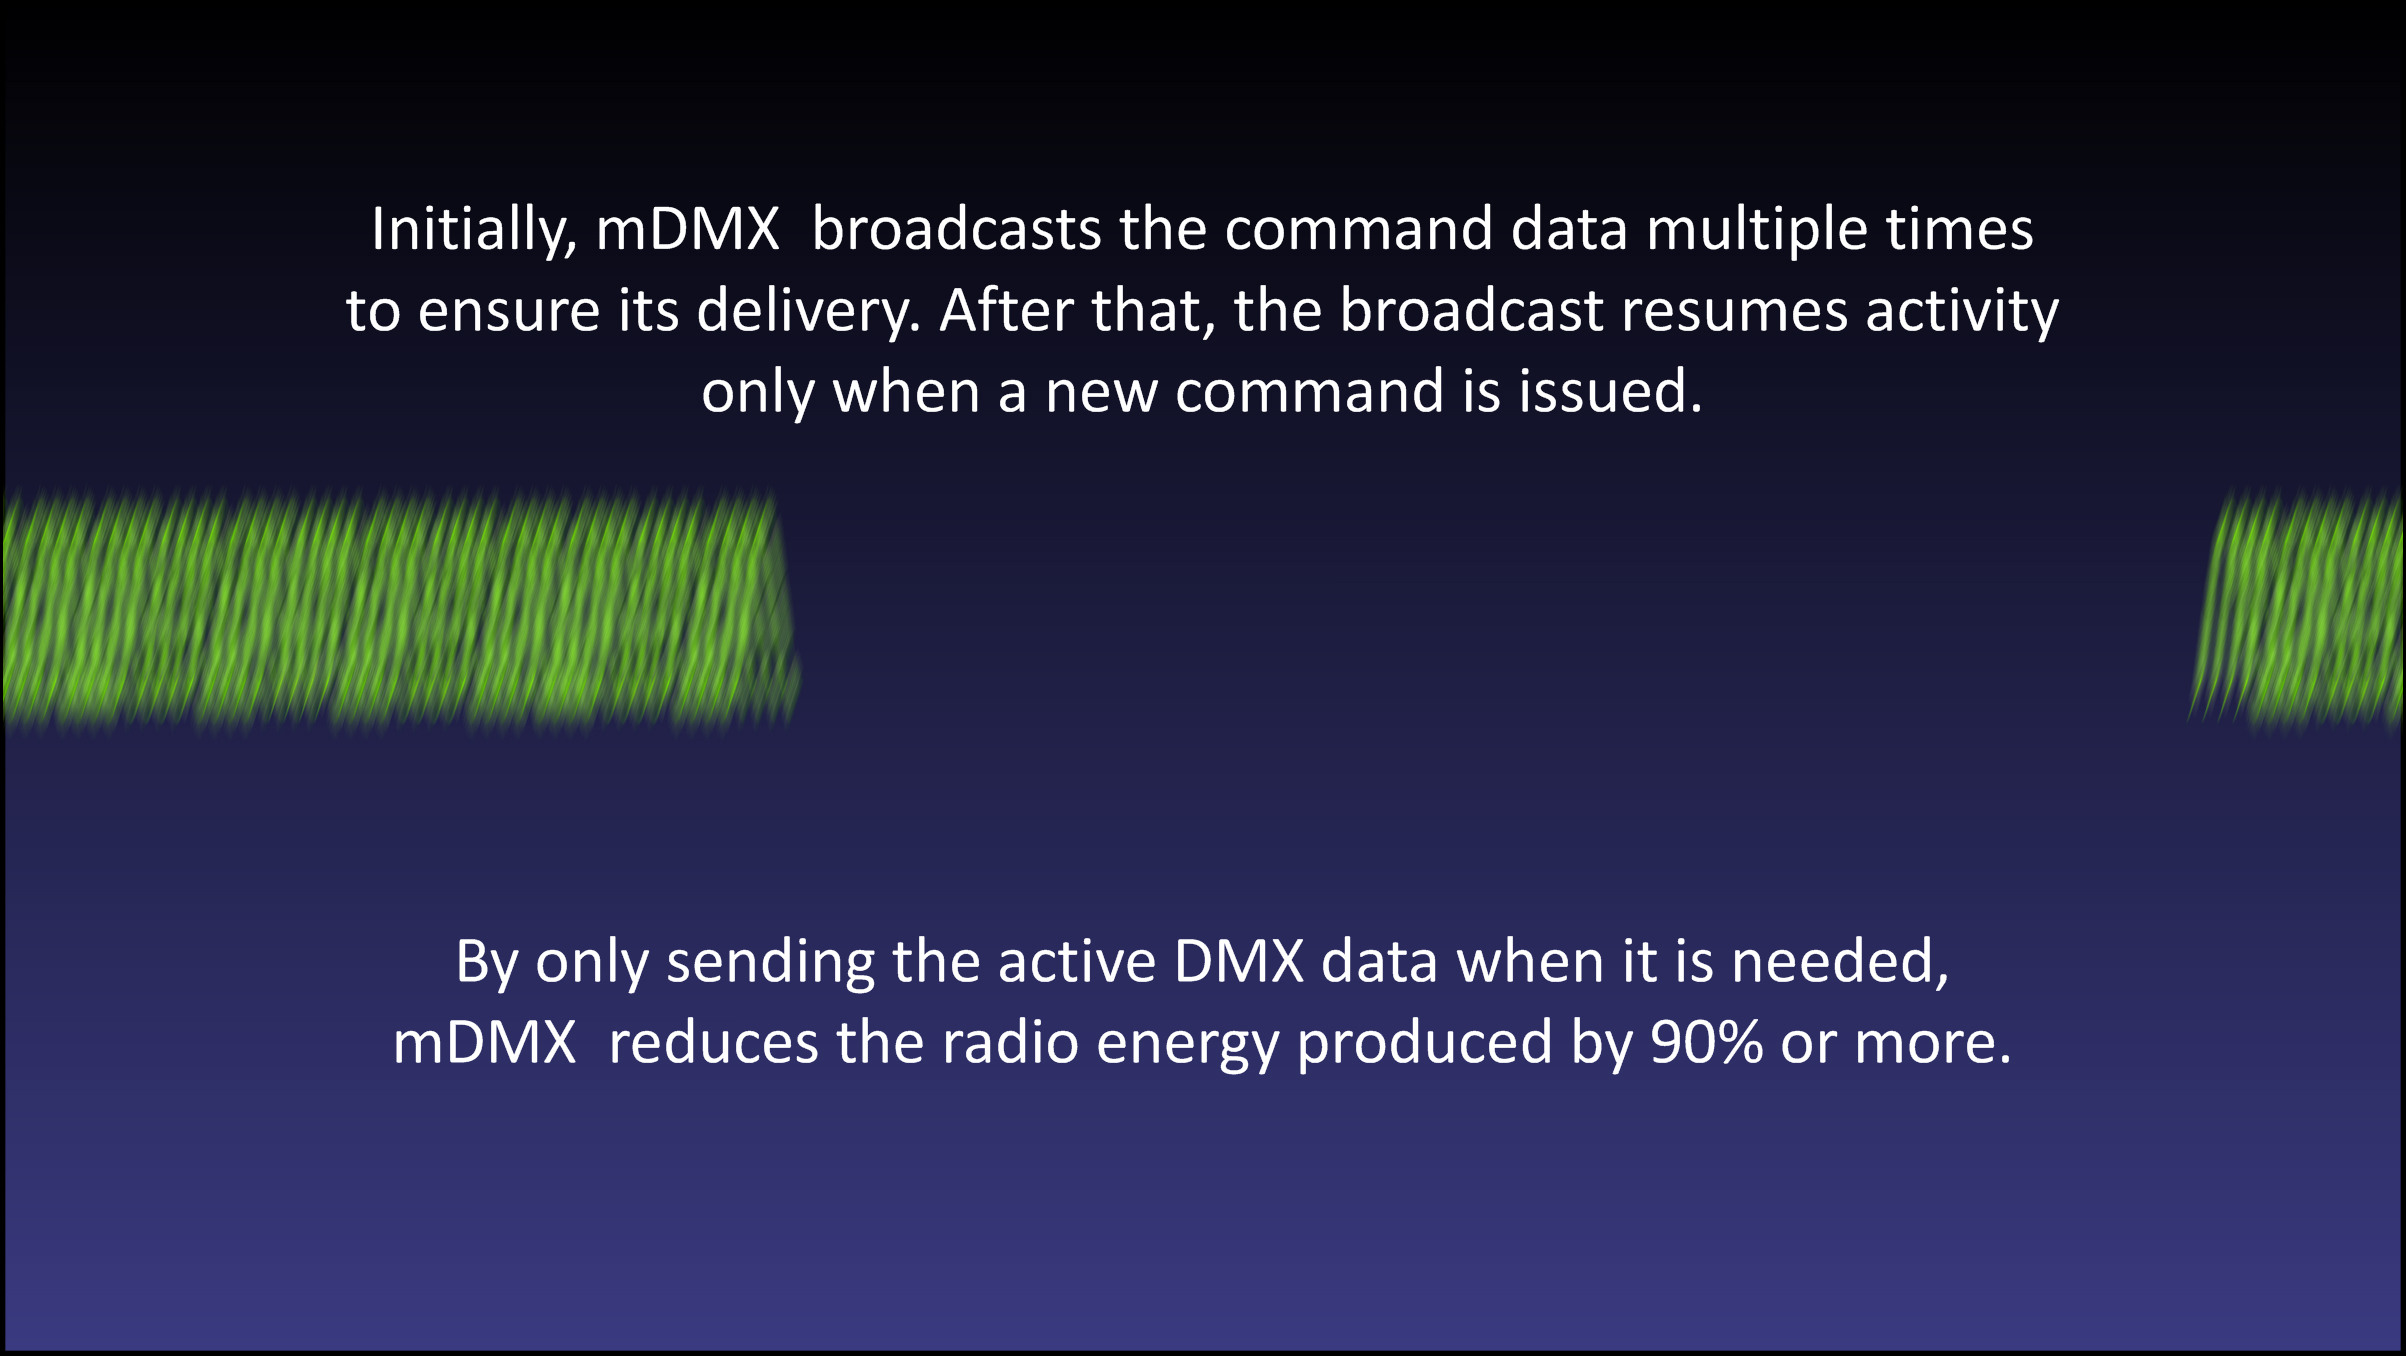 Multiverse 15 mDMX Reduces Radio Energy Produced by 90 percent or more